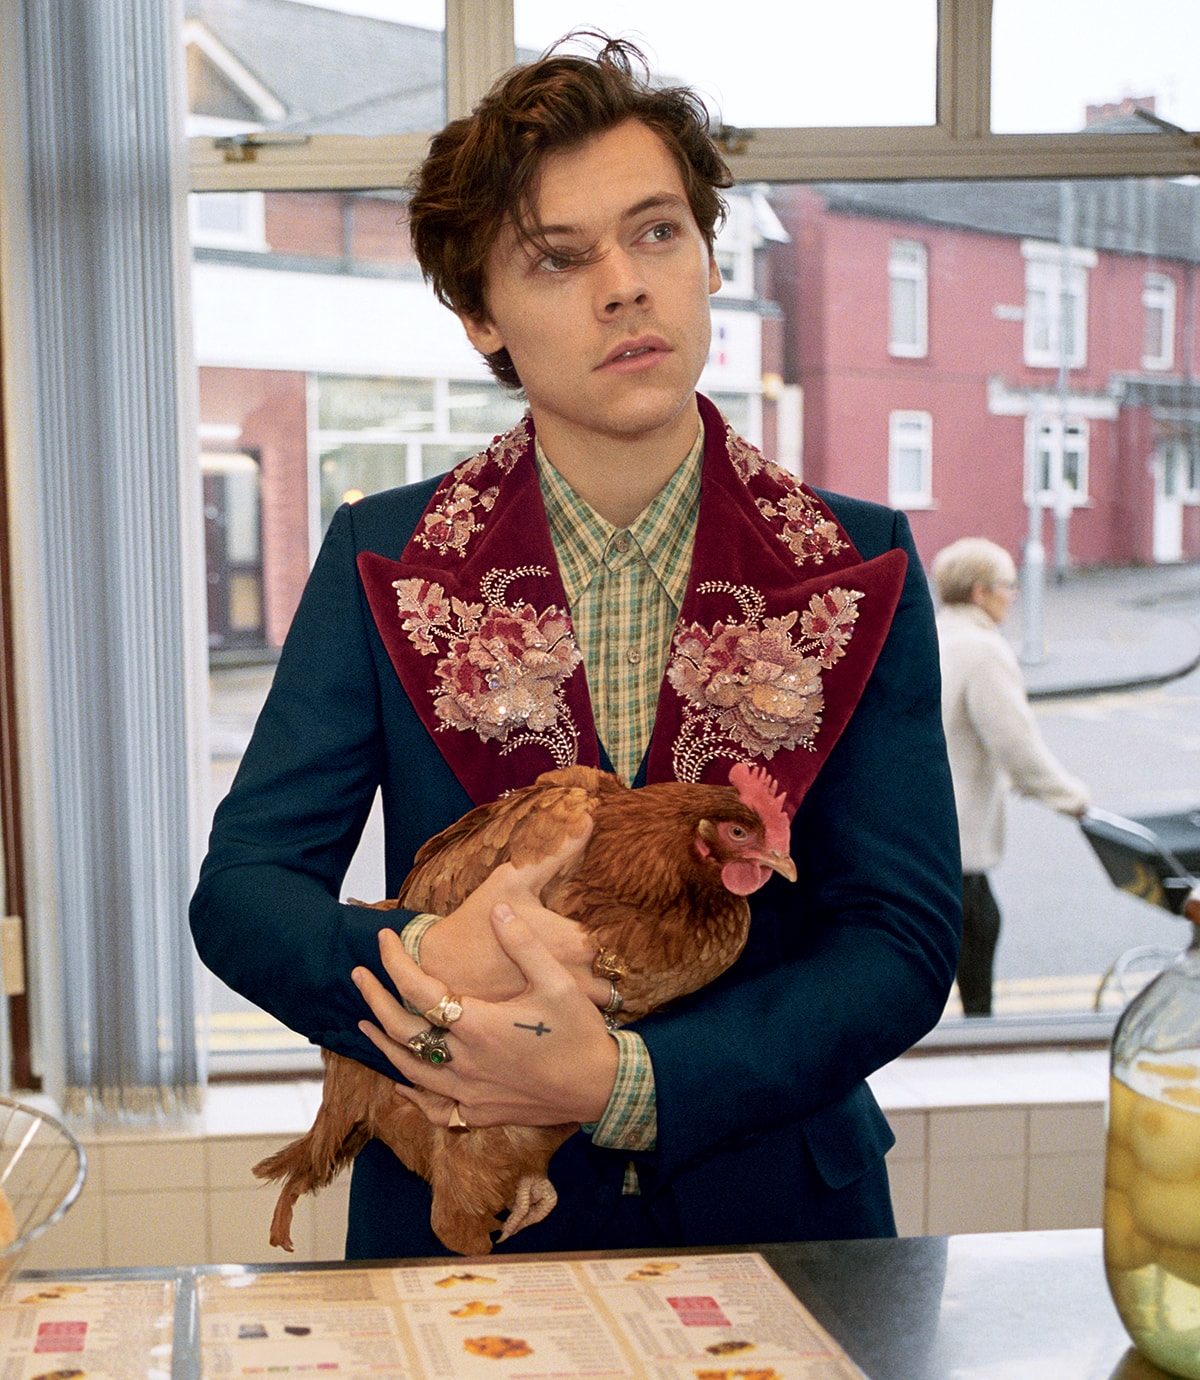 Harry Styles Gucci Fall/Winter 2018 Tailoring Campaign Glen Luchford Alessandro Michele Lookbook Imagery Details Suits